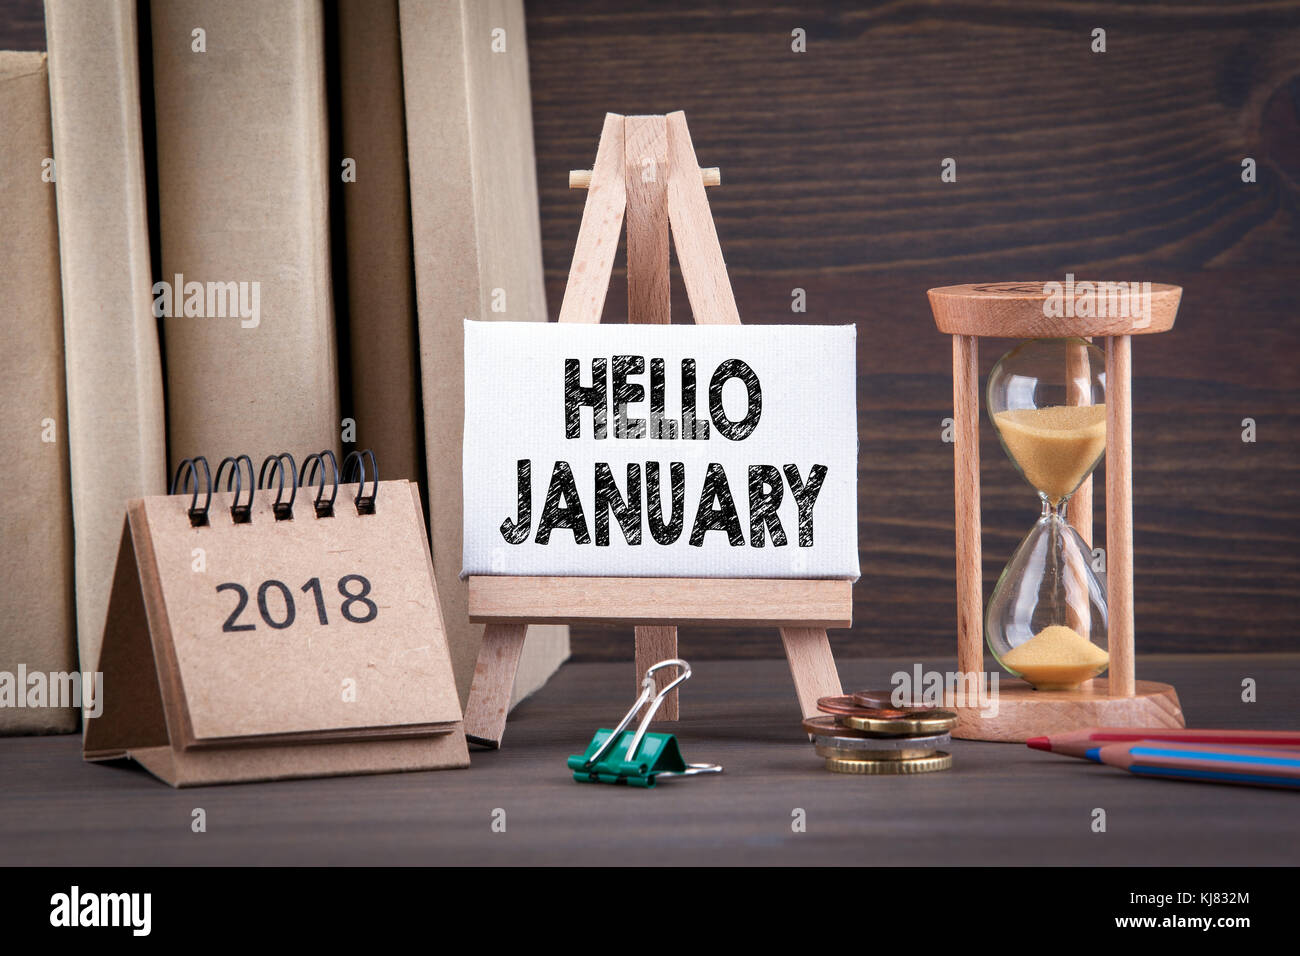 hello january. Sandglass, hourglass or egg timer on wooden table  Stock Photo